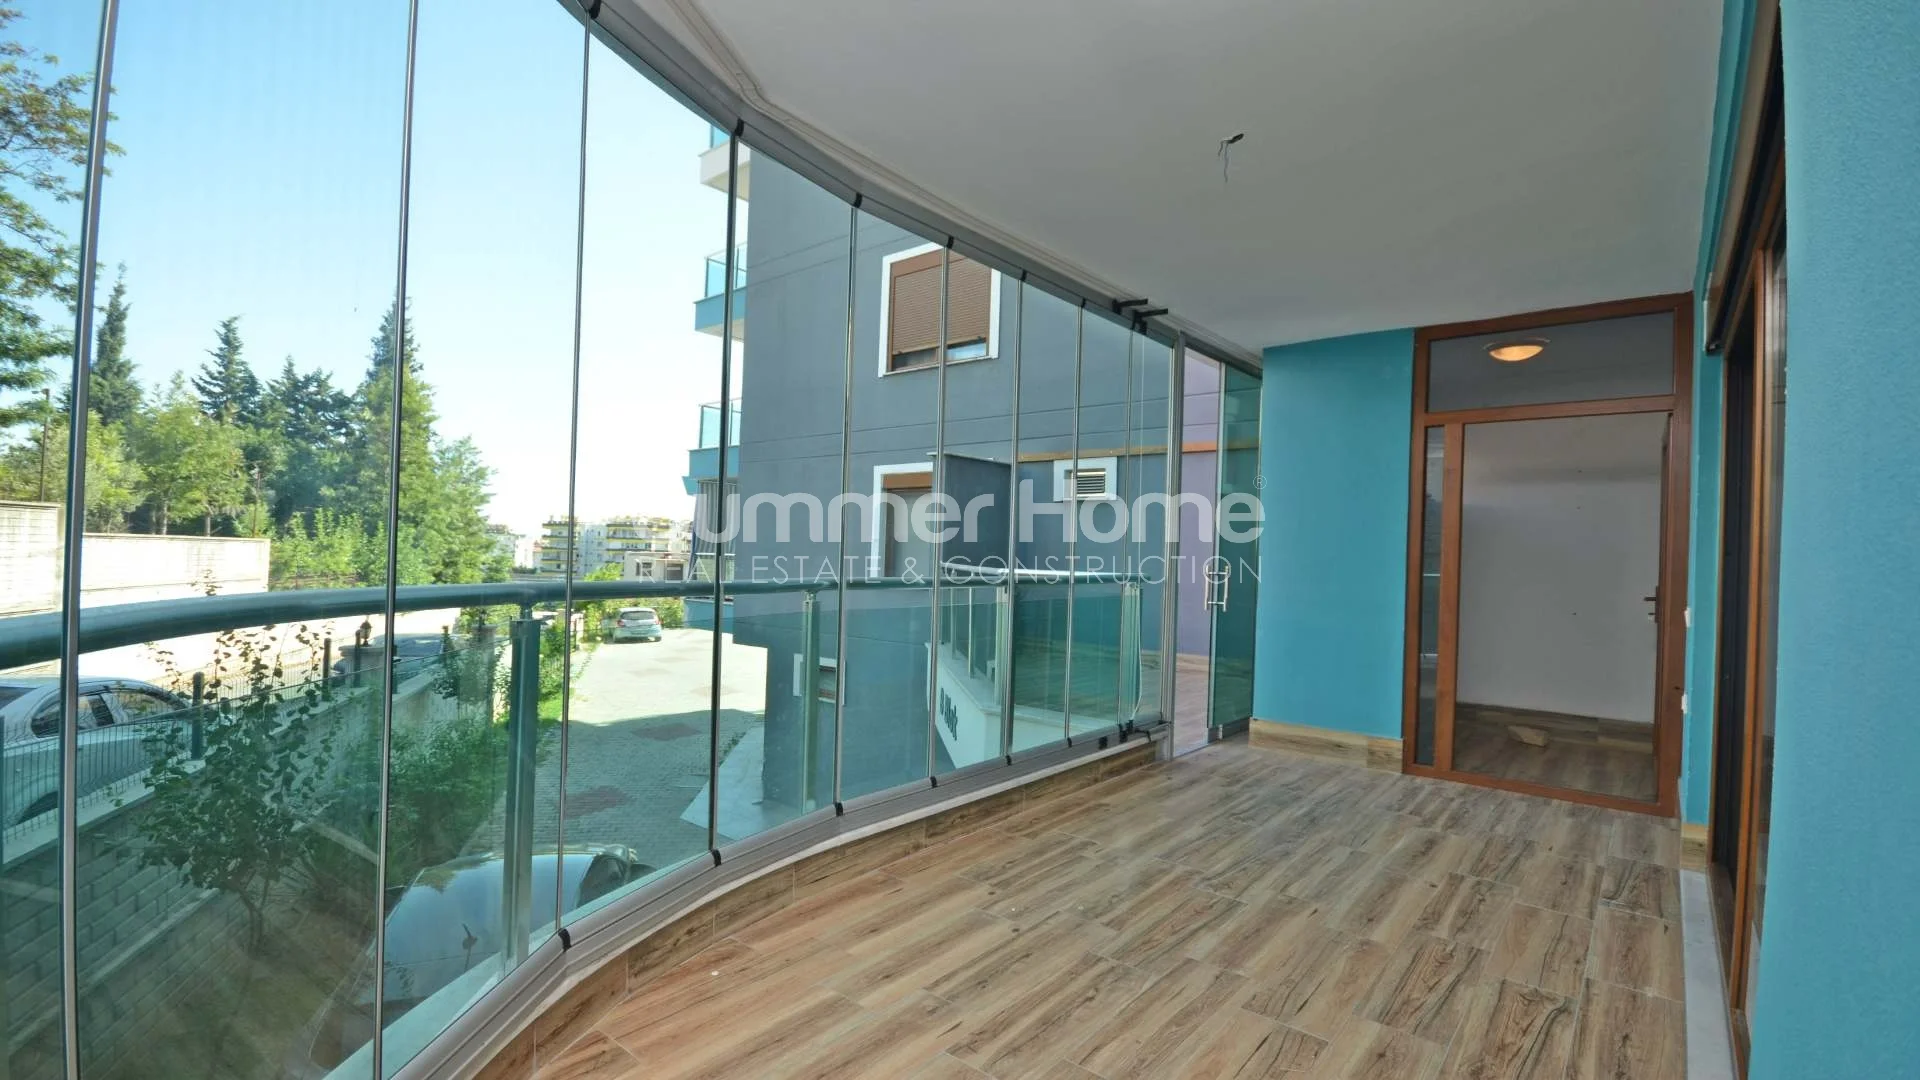 For sale Apartment Alanya Hasbahce Interior - 11